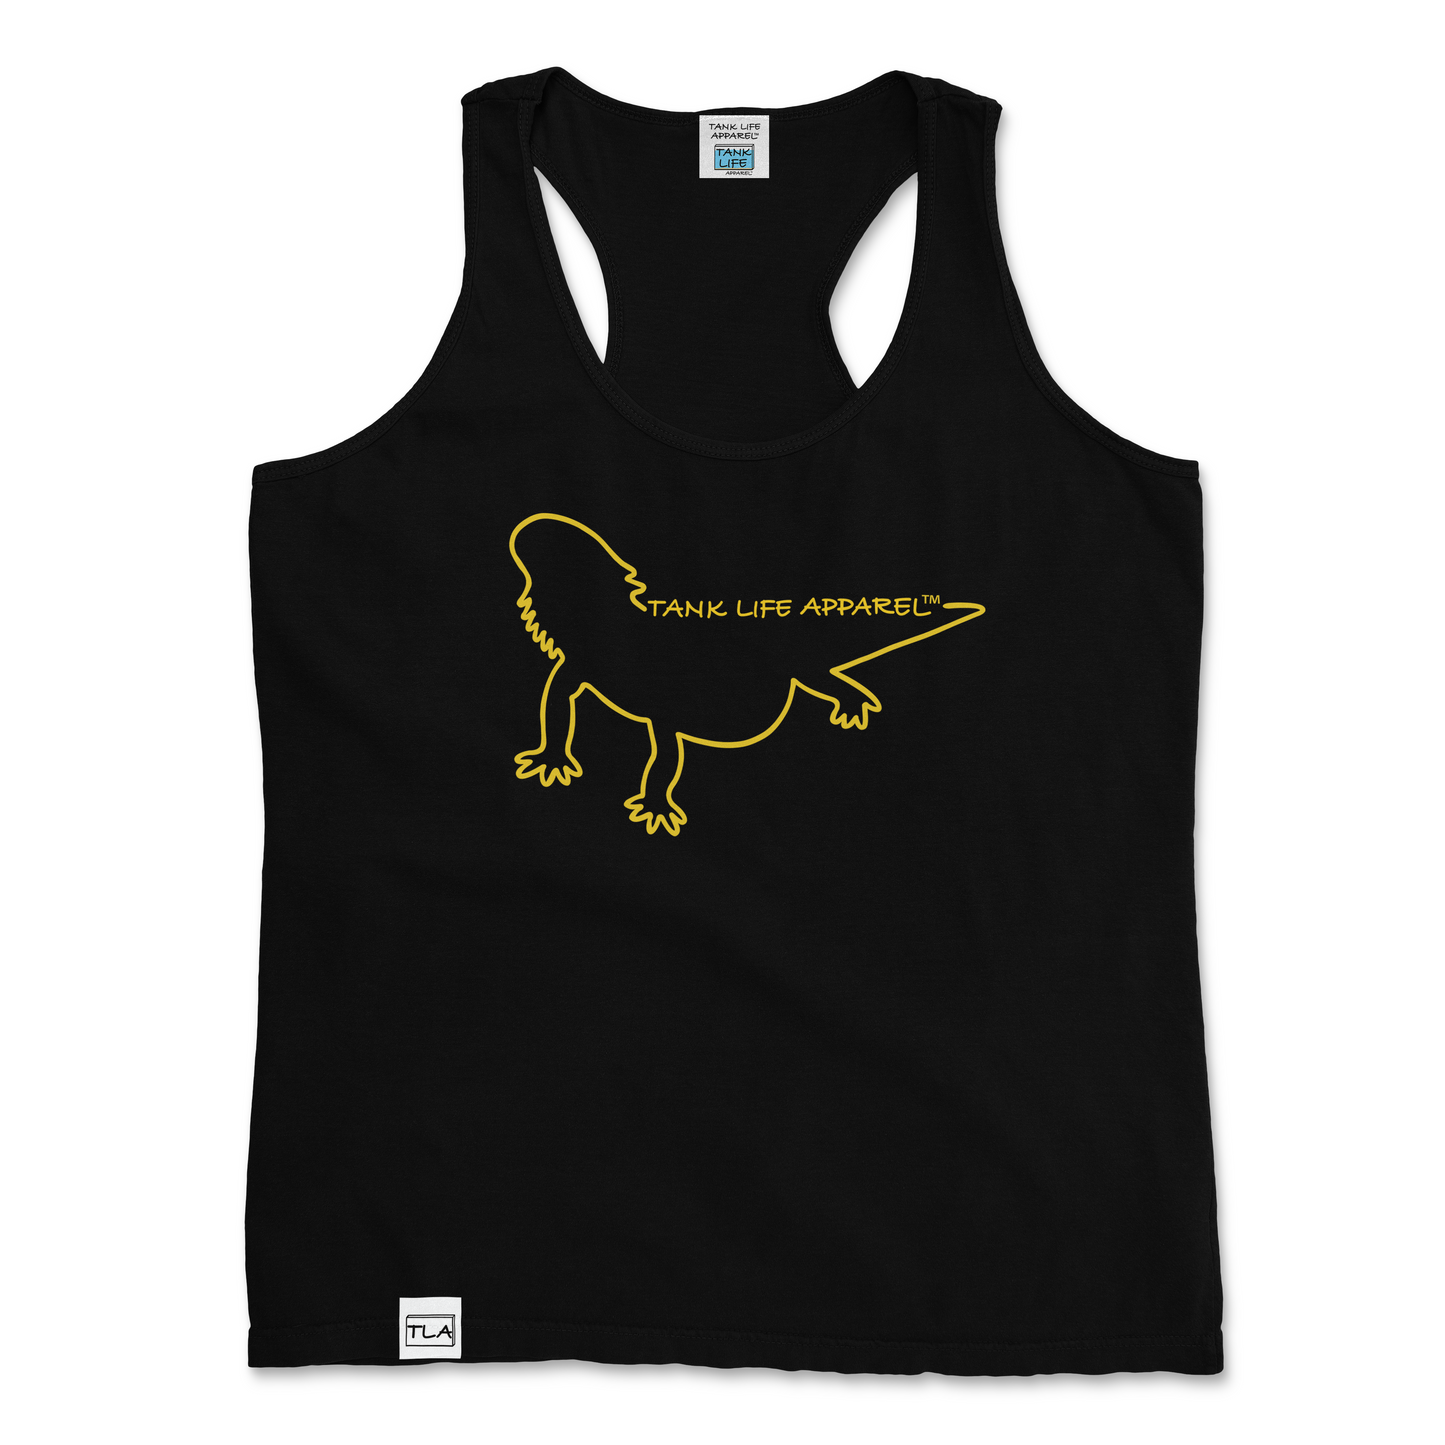 The Tank Life Apparel bearded dragon outline design on a stylish women's tank top with our custom TLA hem label. 